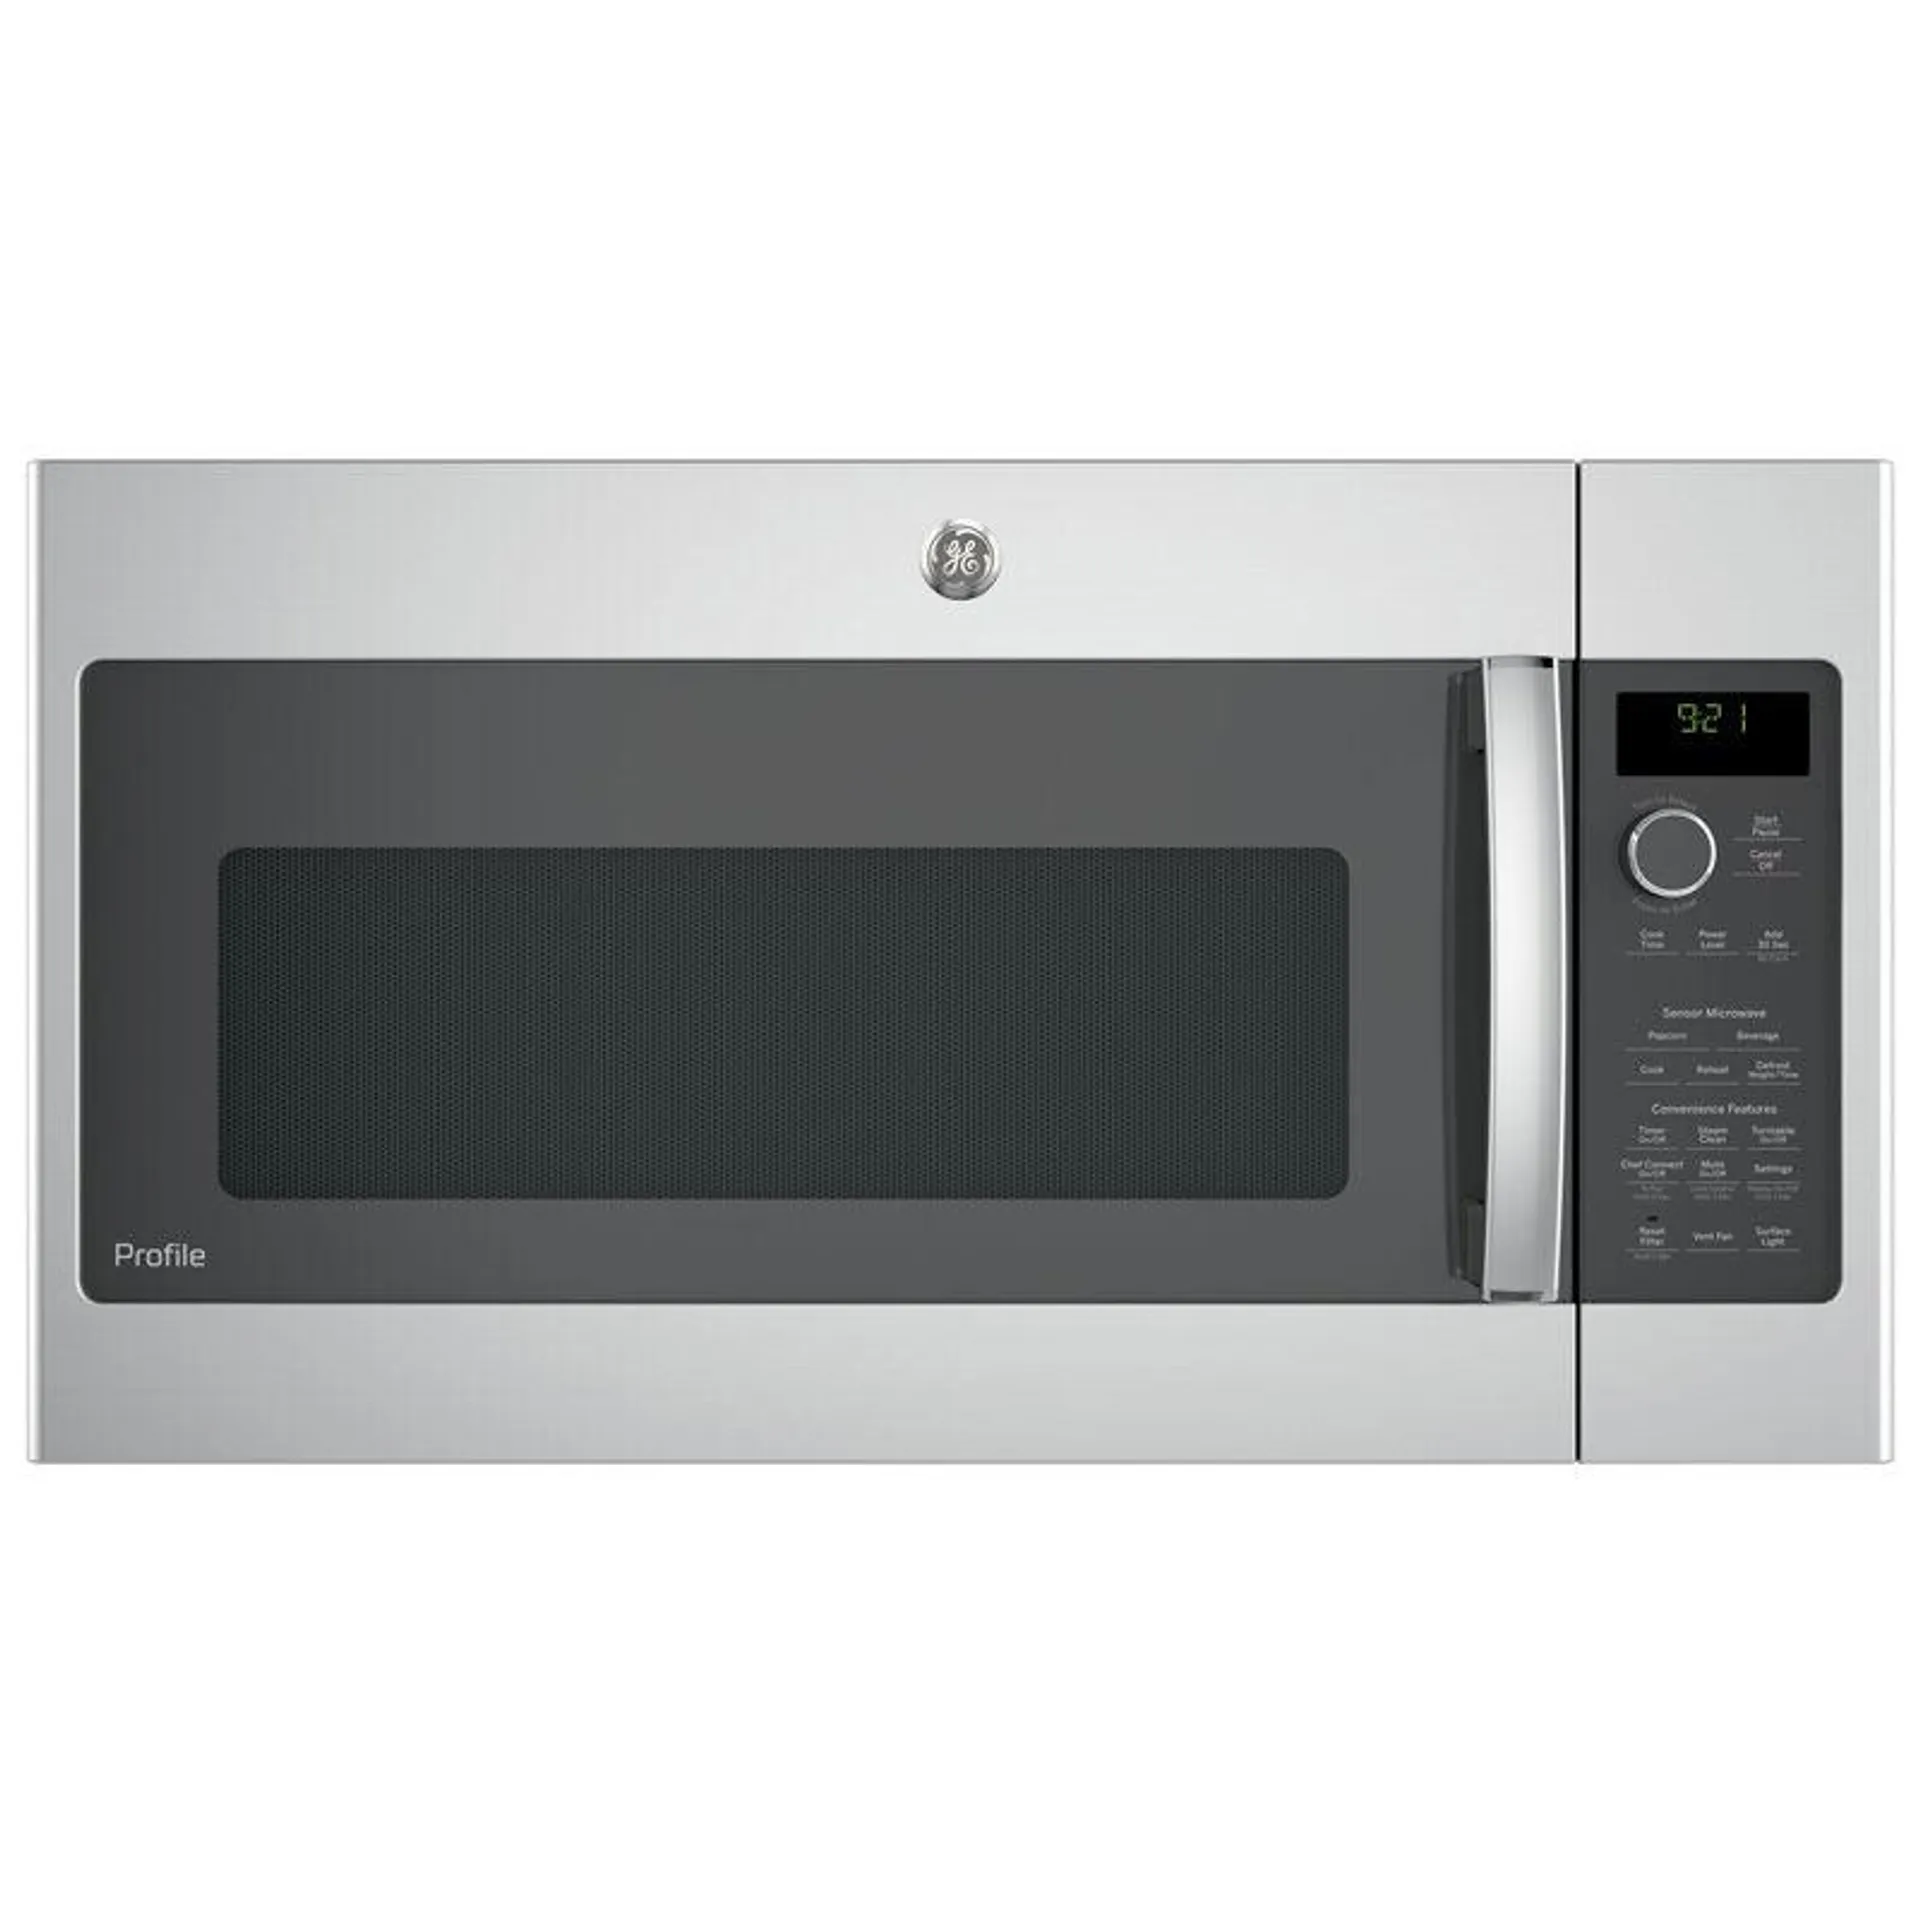 GE Profile 30" 2.1 Cu. Ft. Over-the-Range Microwave with 10 Power Levels, 400 CFM & Sensor Cooking Controls - Stainless Steel